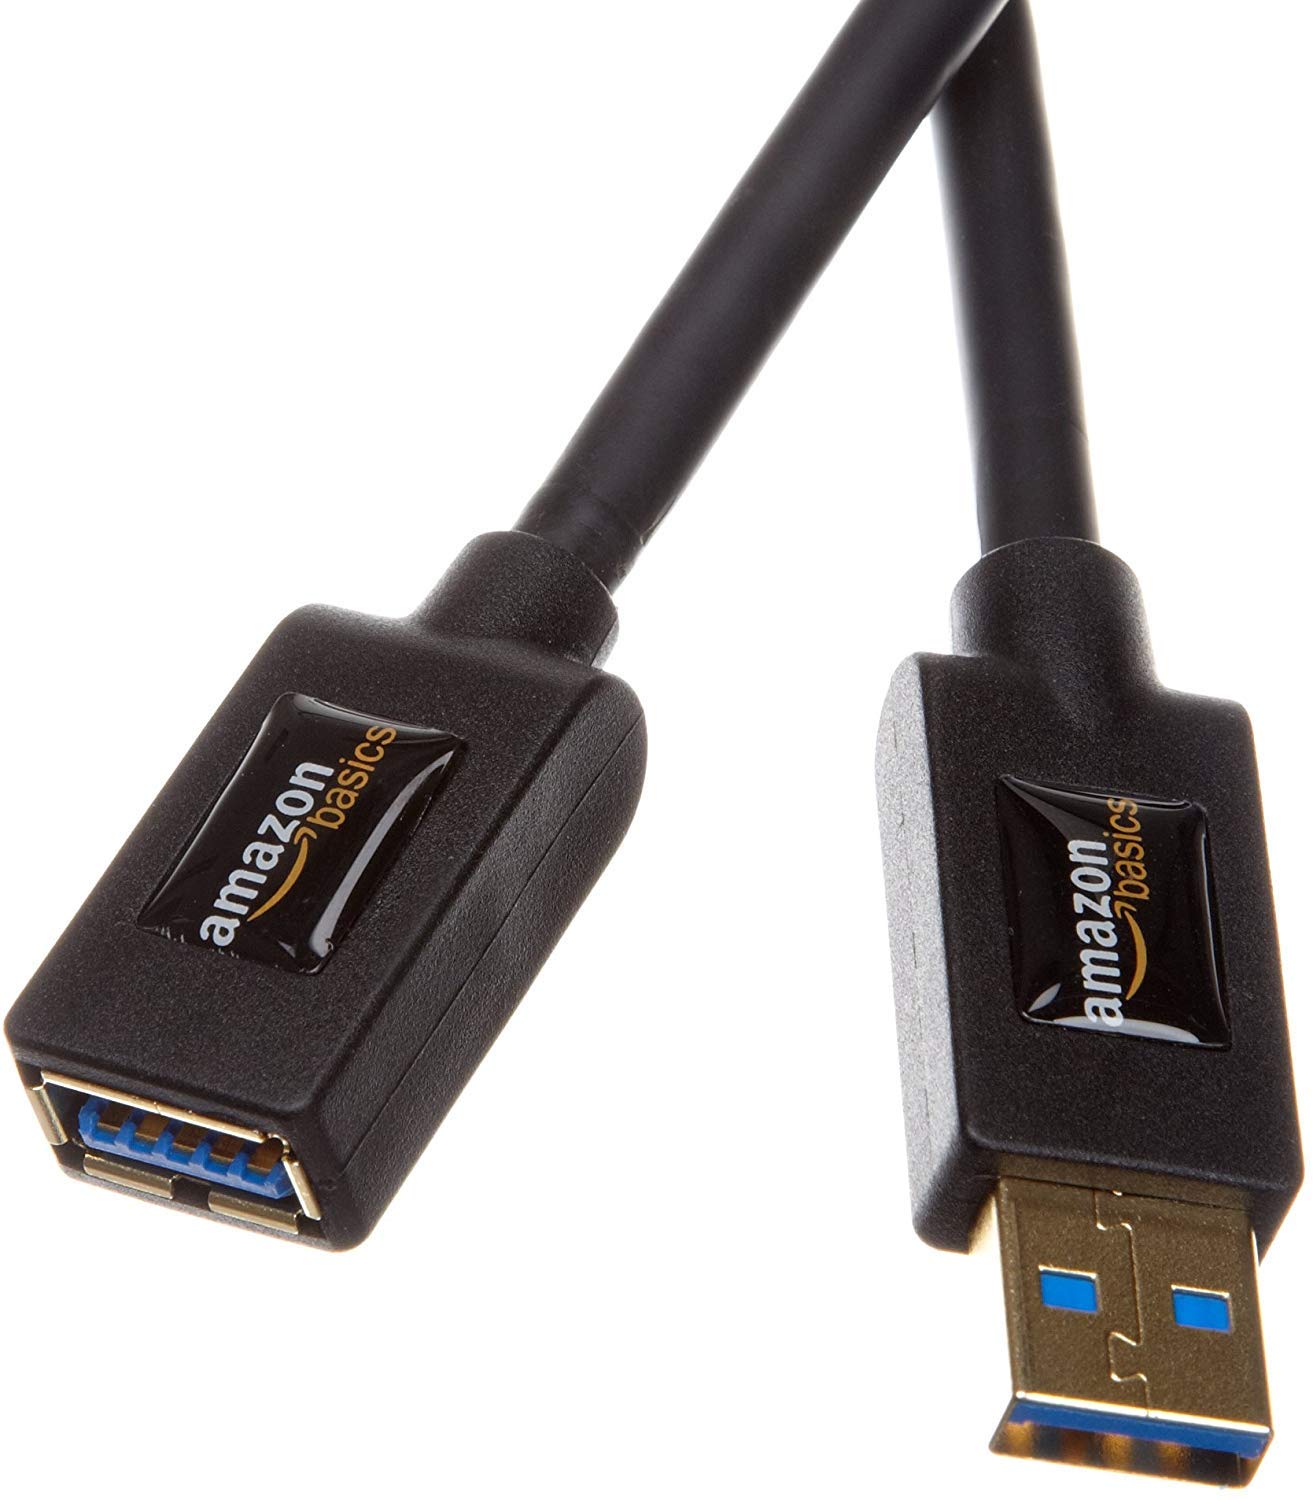 Amazon Basics USB-A 3.0 Extension Cable, 4.8Gbps High-Speed, Male to Female Gold-Plated Connectors, 3.3 Foot, Black